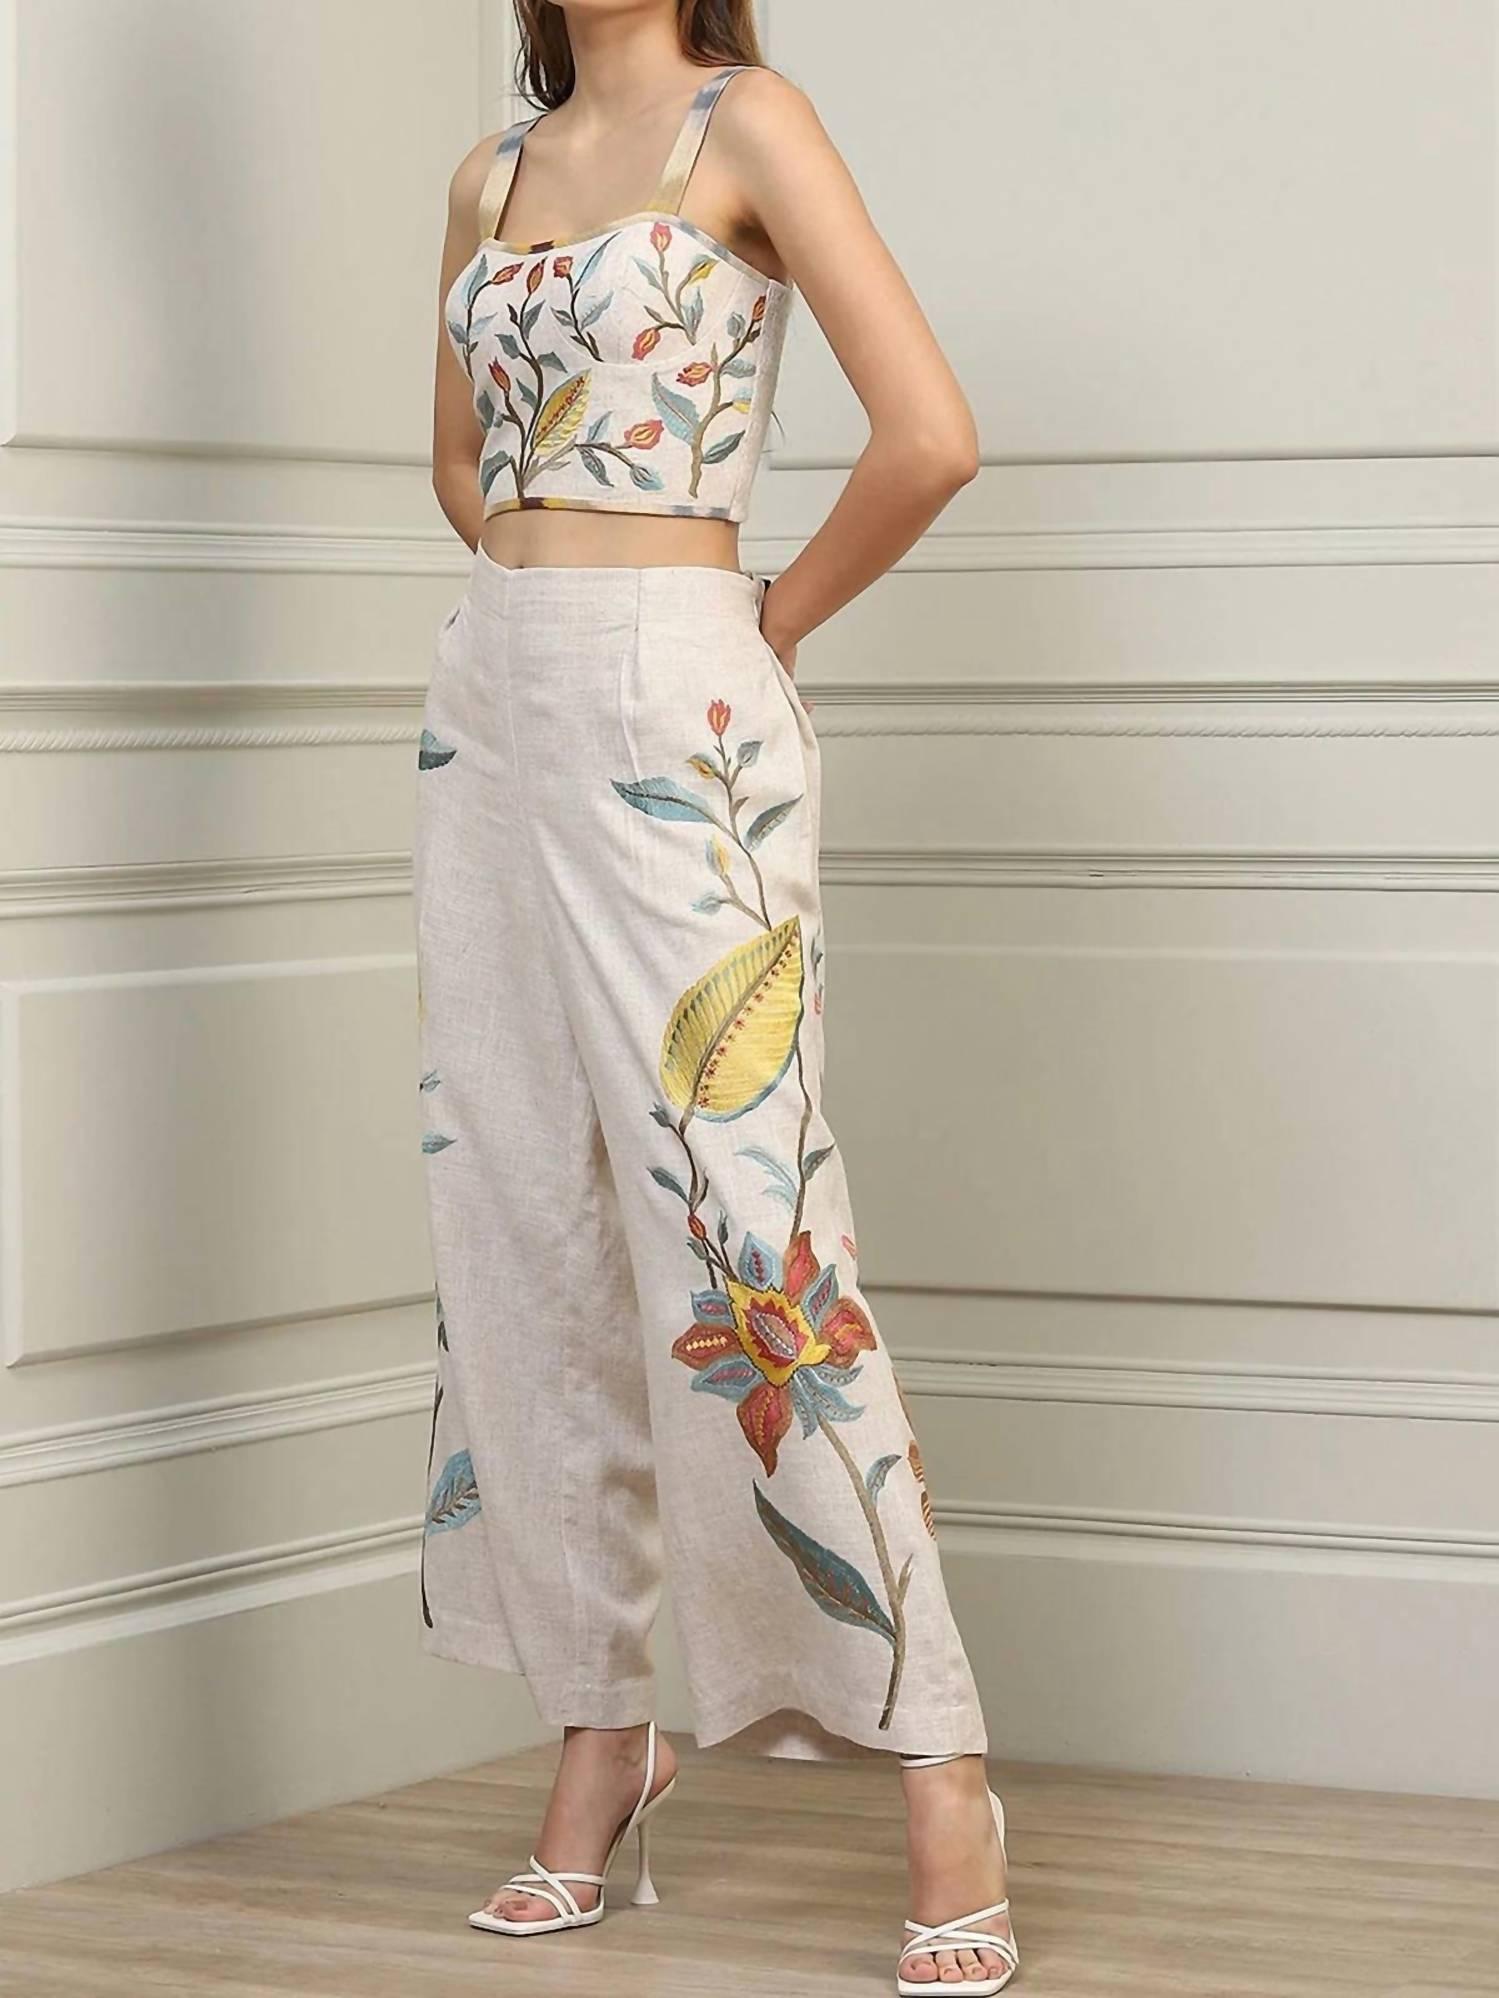 Ranna Gill Zoya Pant In Floral in Natural